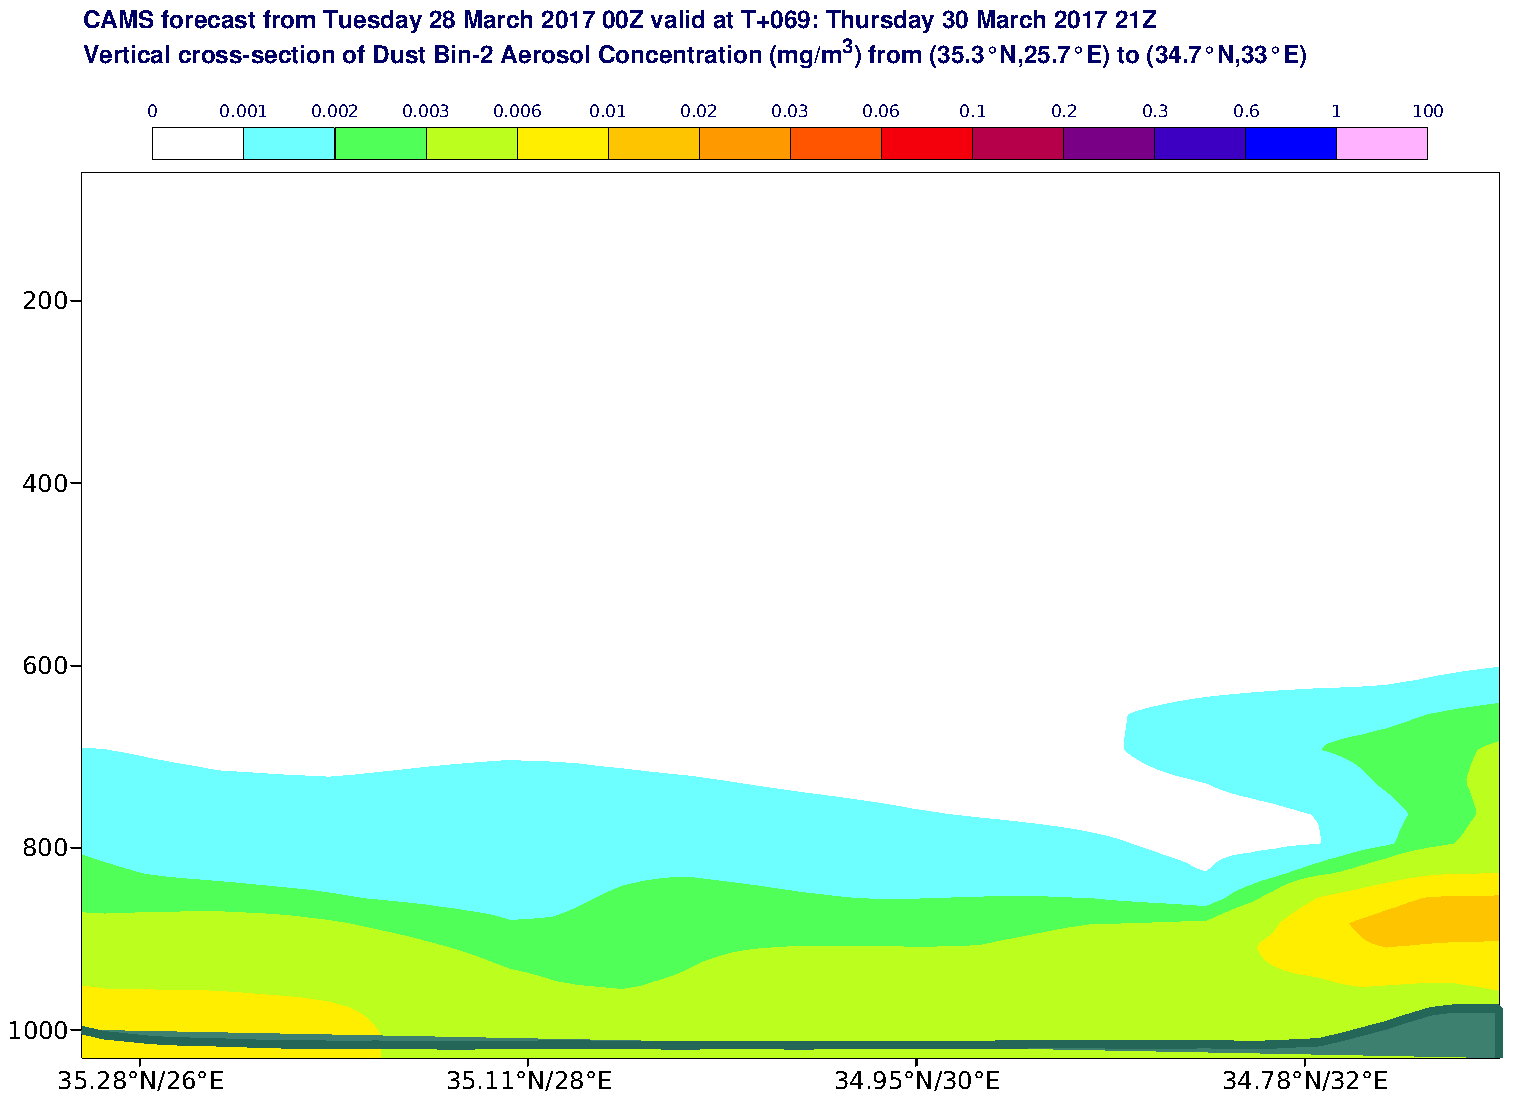 Vertical cross-section of Dust Bin-2 Aerosol Concentration (mg/m3) valid at T69 - 2017-03-30 21:00